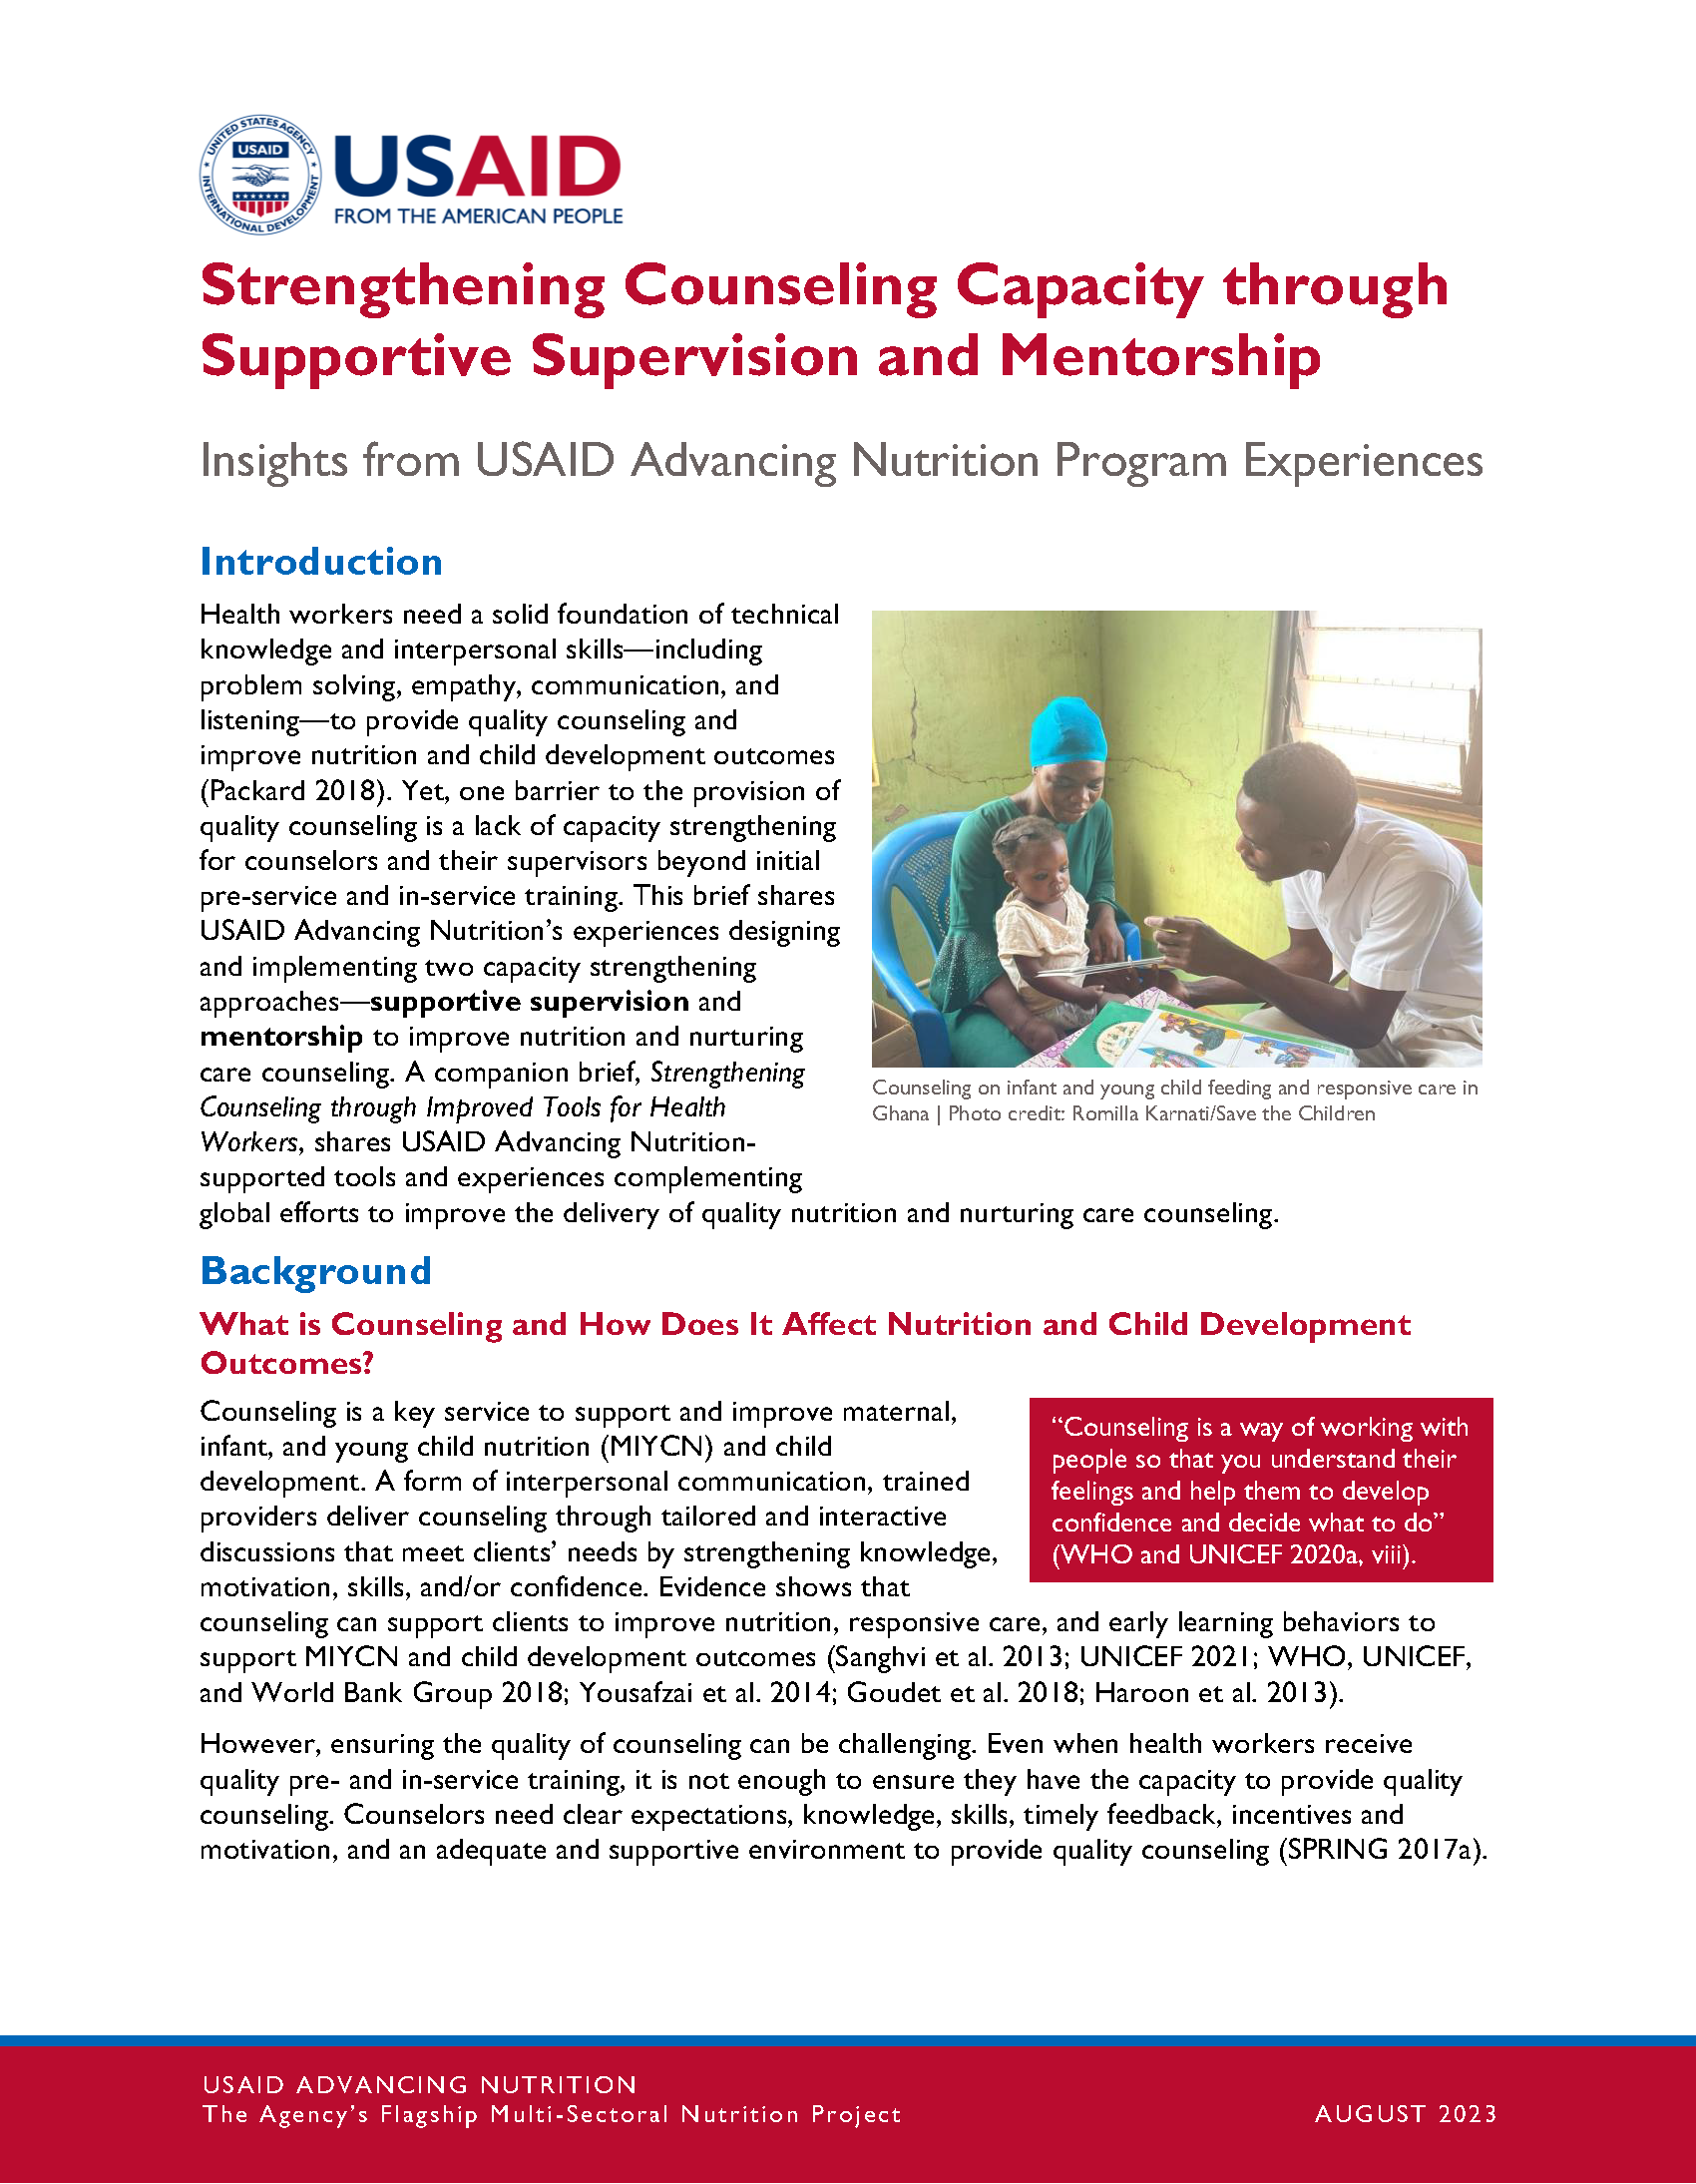 Cover page for Strengthening Counseling Capacity through Supportive Supervision and Mentorship